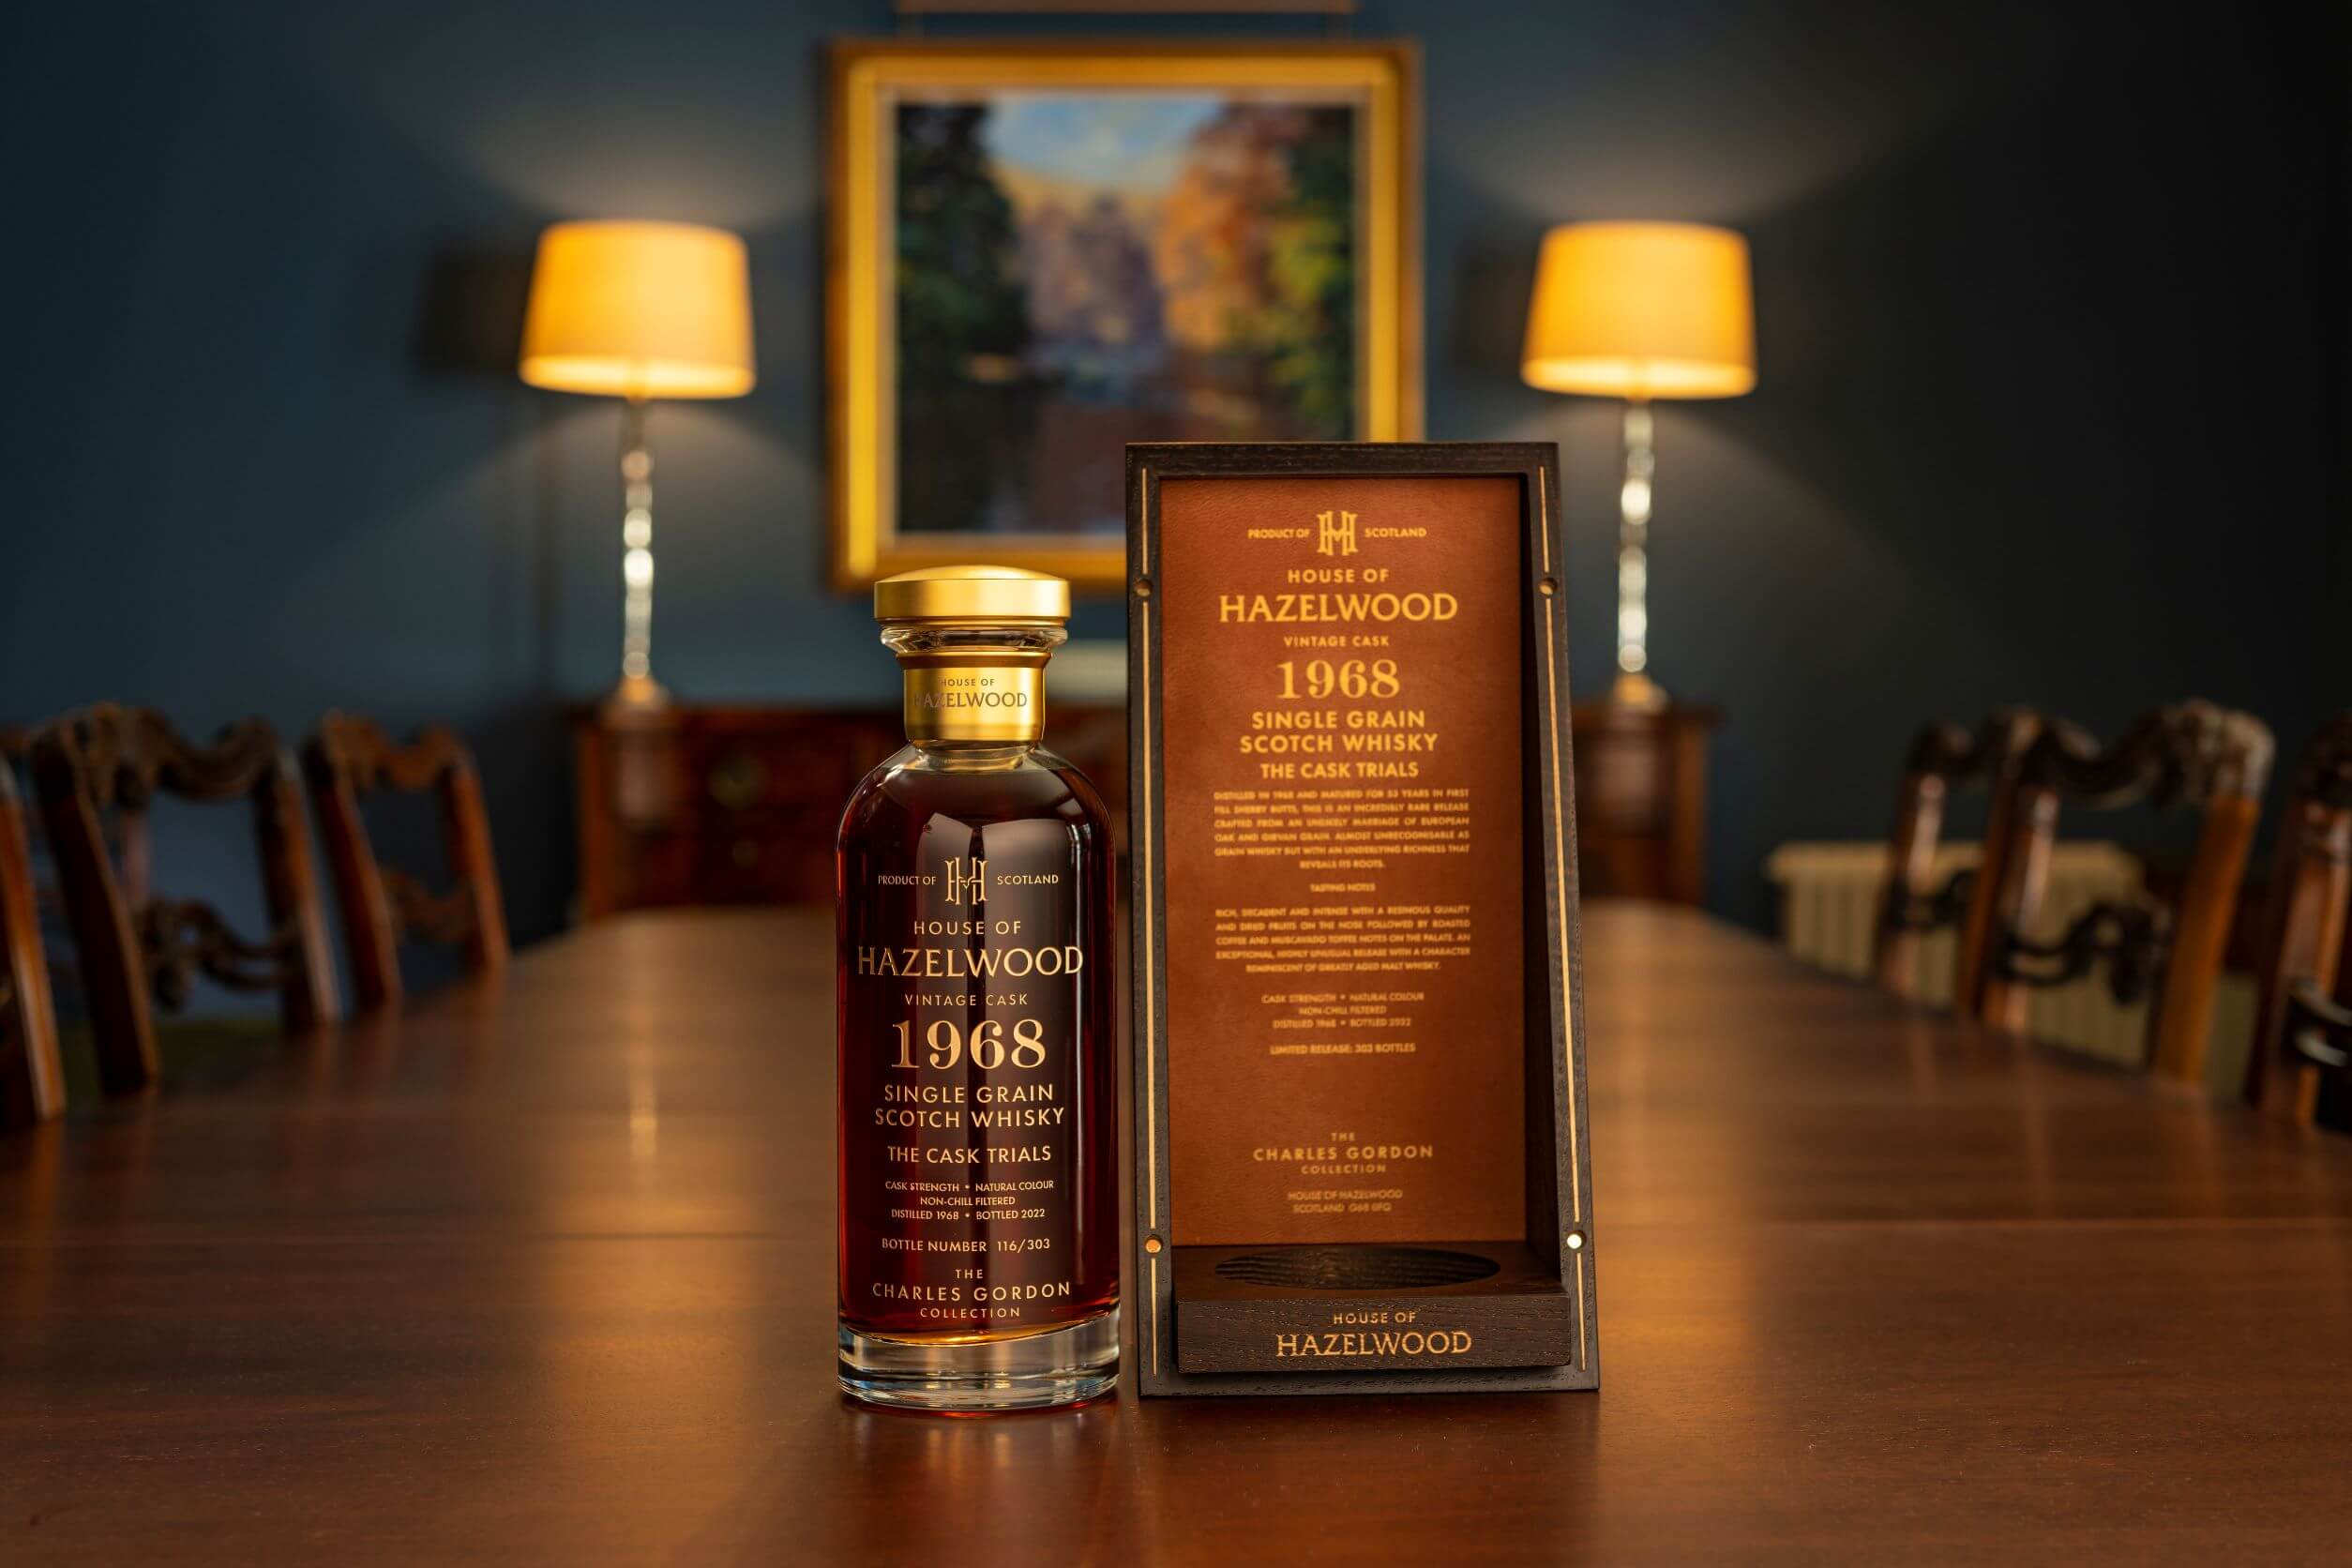 A bottle of The Cask Trials sitting on a table next to it's box.